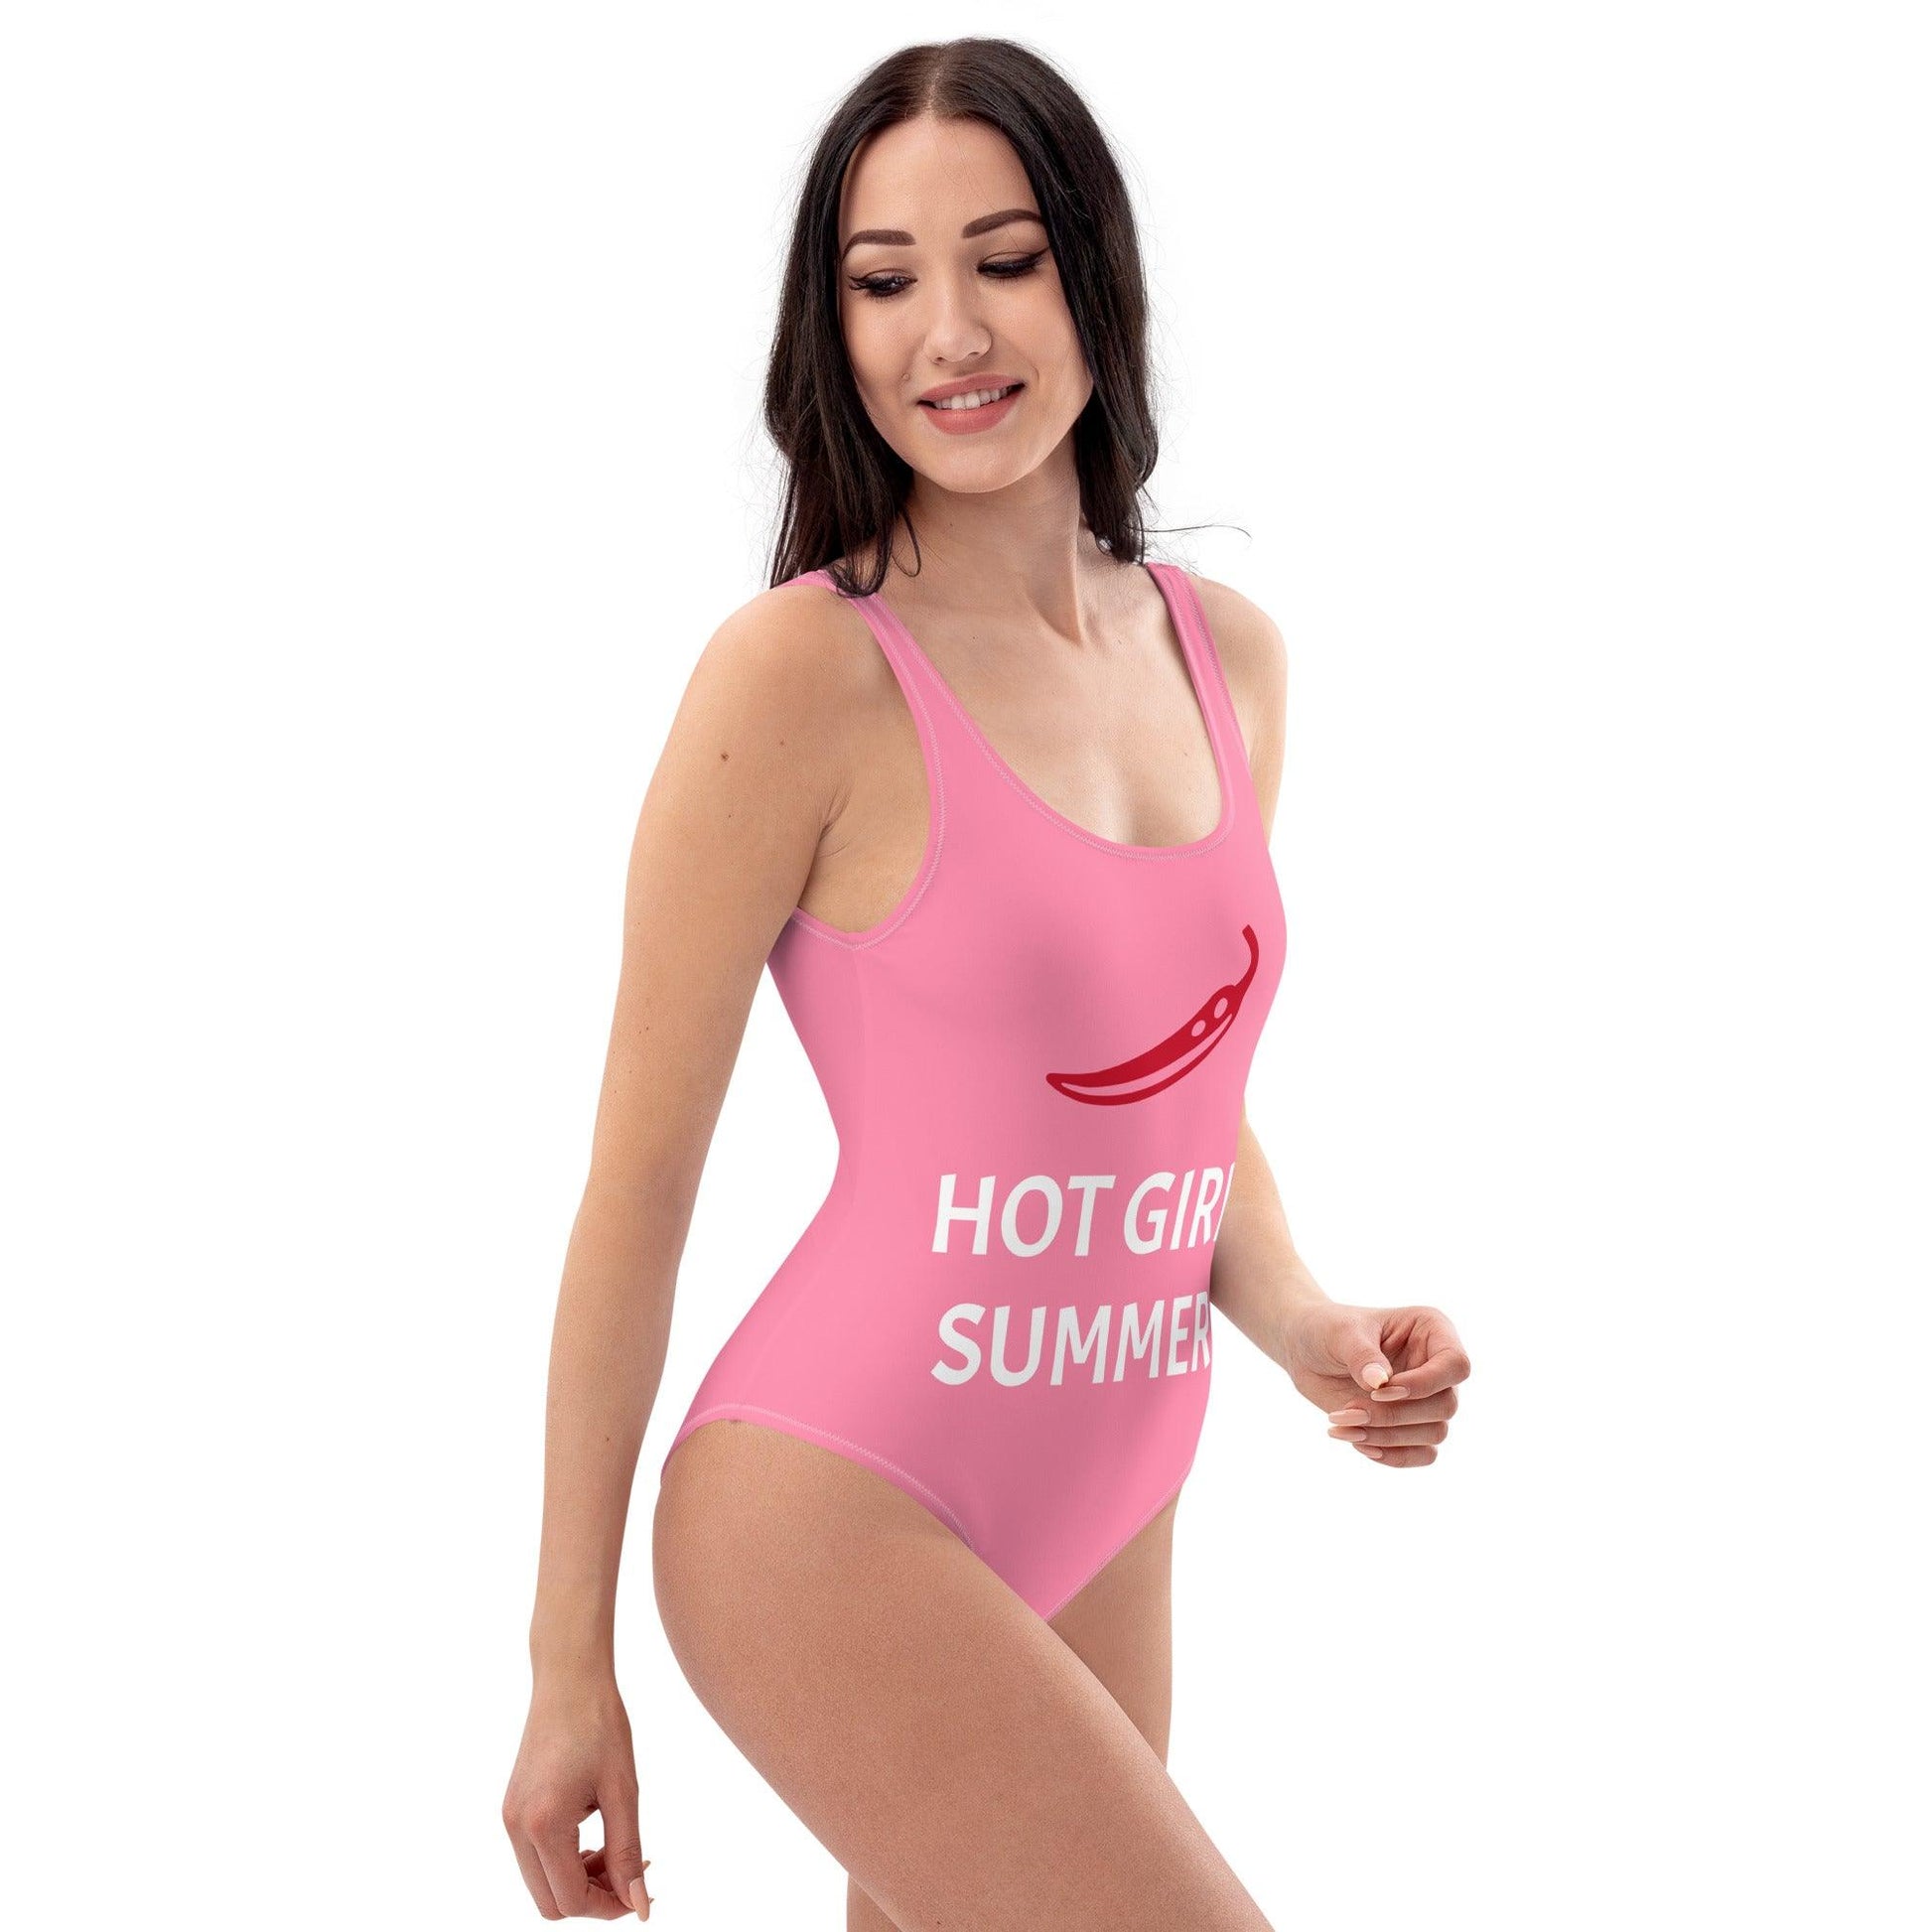 Sizzling Hot Girl Summer Pink Swimsuit